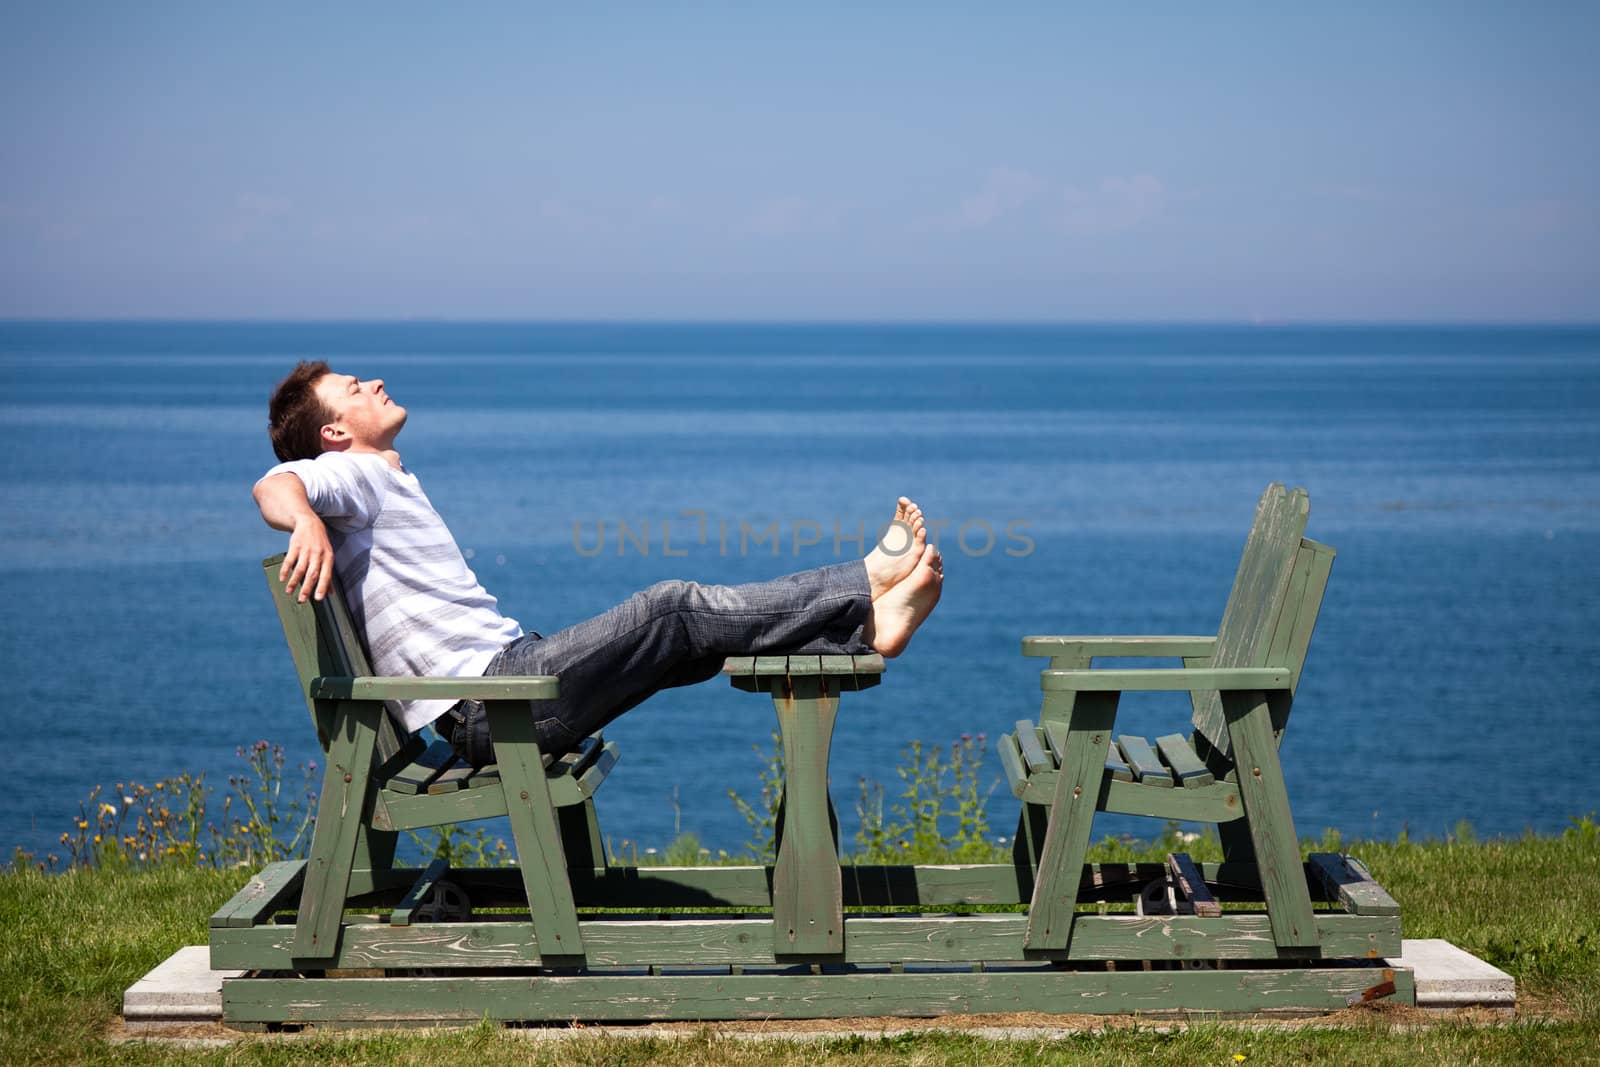 Man having a beautiful moment on a bench in vacation